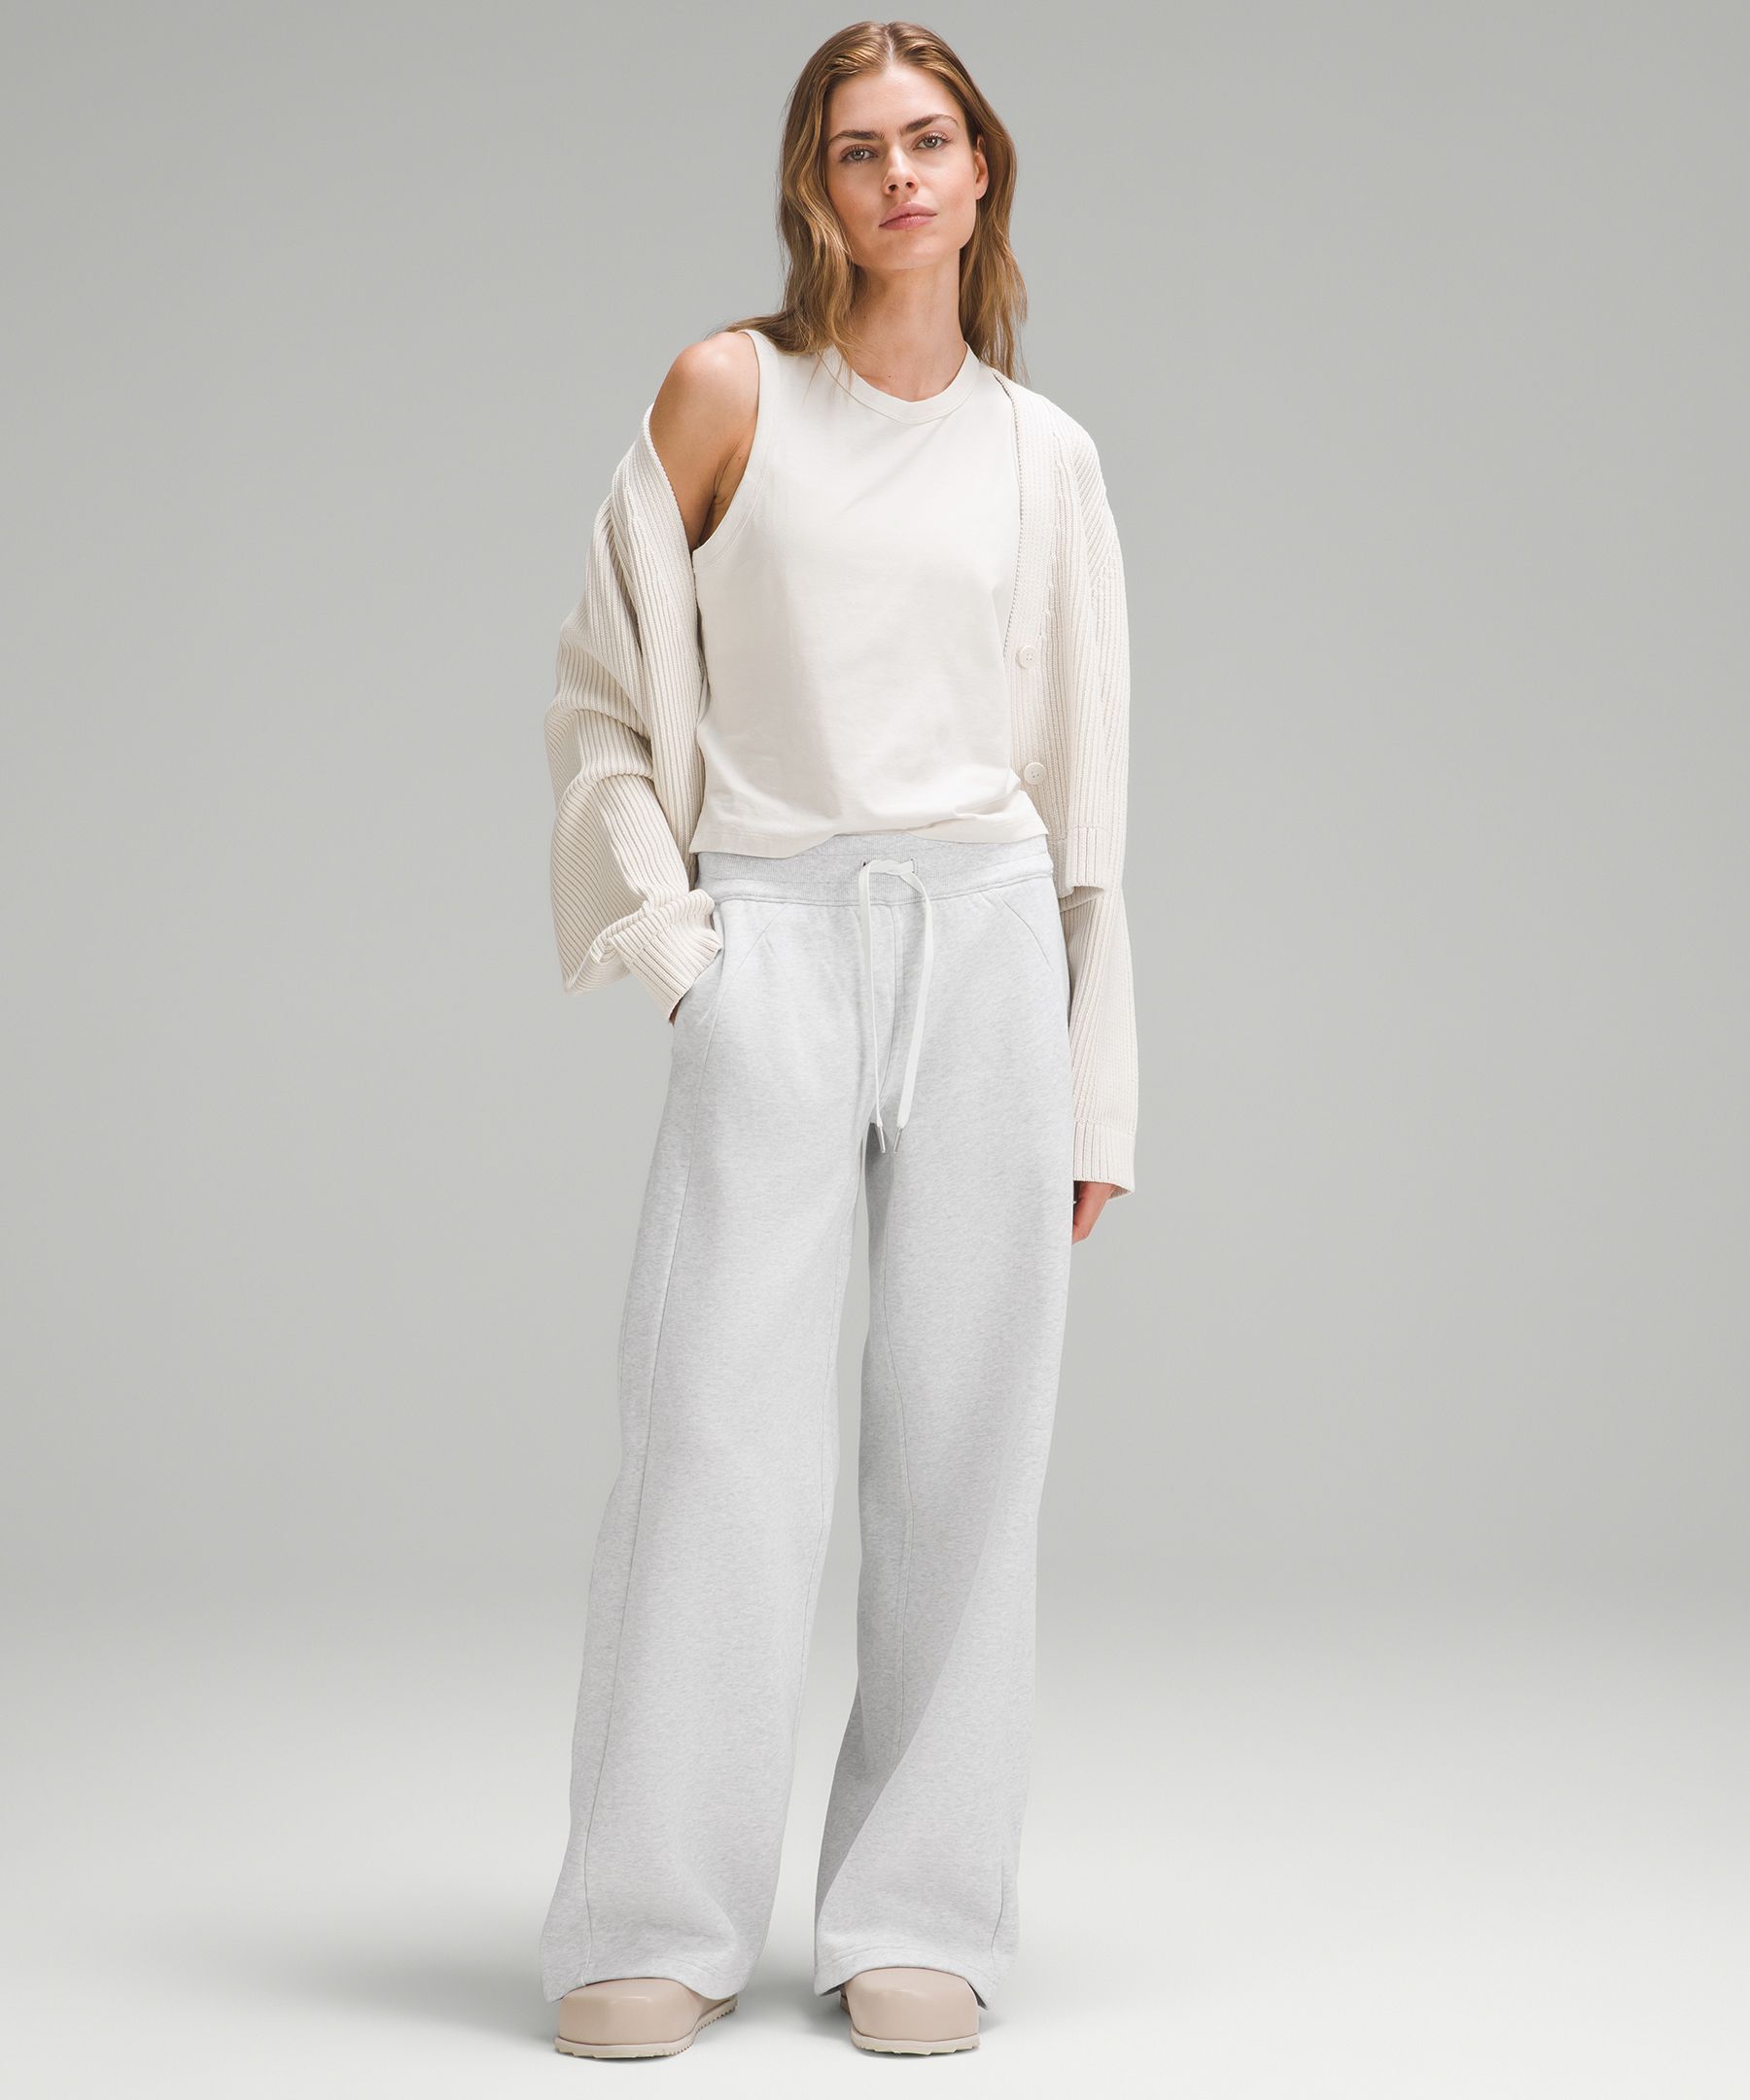 Scuba Mid-Rise Wide-Leg Pant Full … curated on LTK